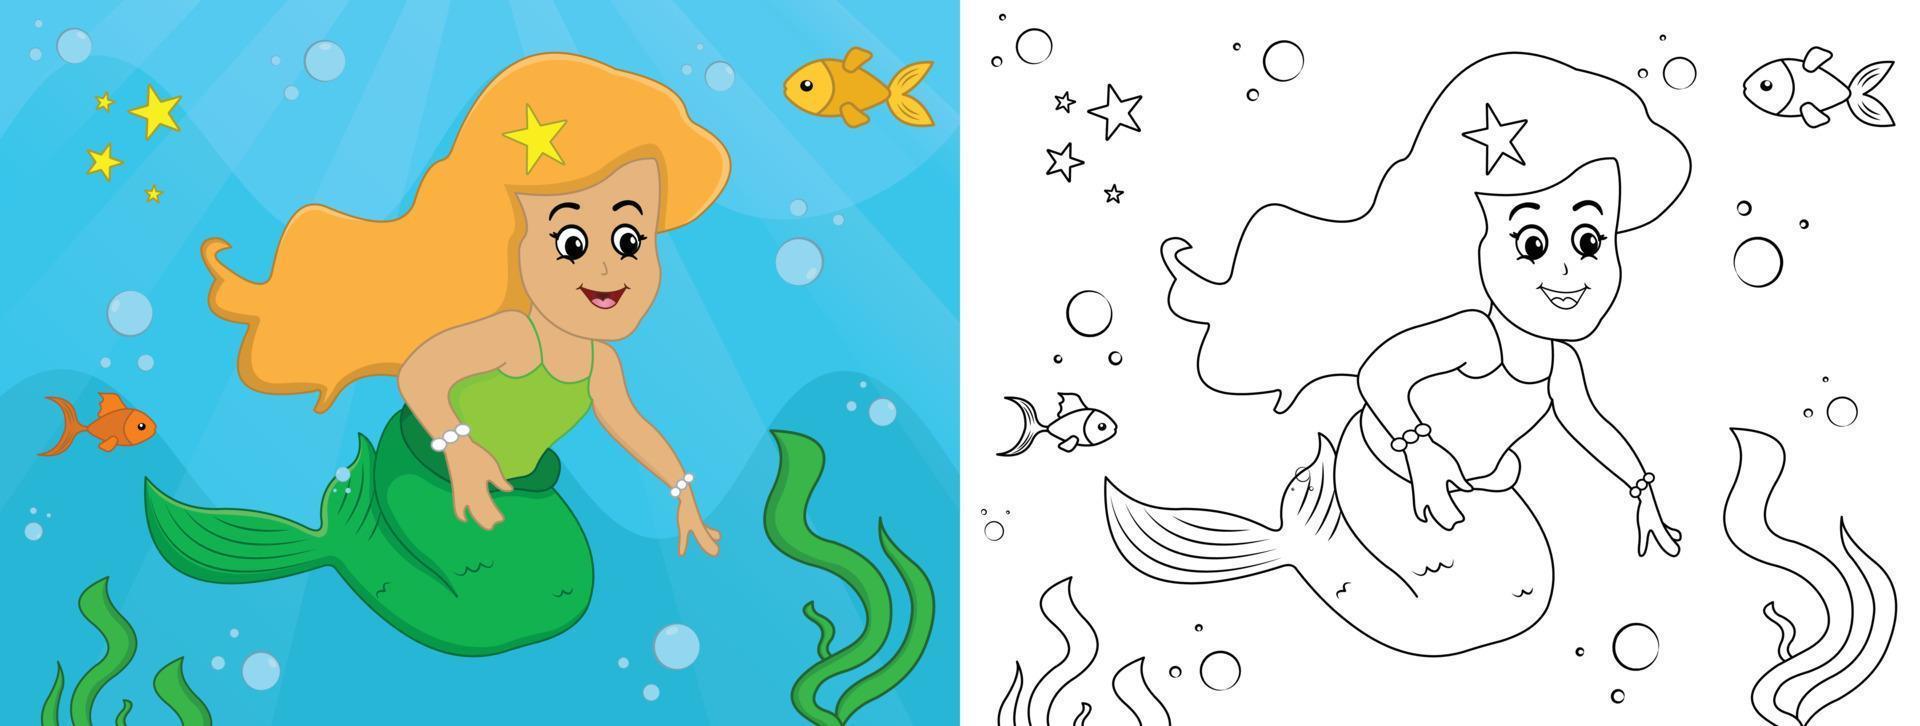 Cartoon mermaid coloring page no 06 kids activity page with line art vector illustration